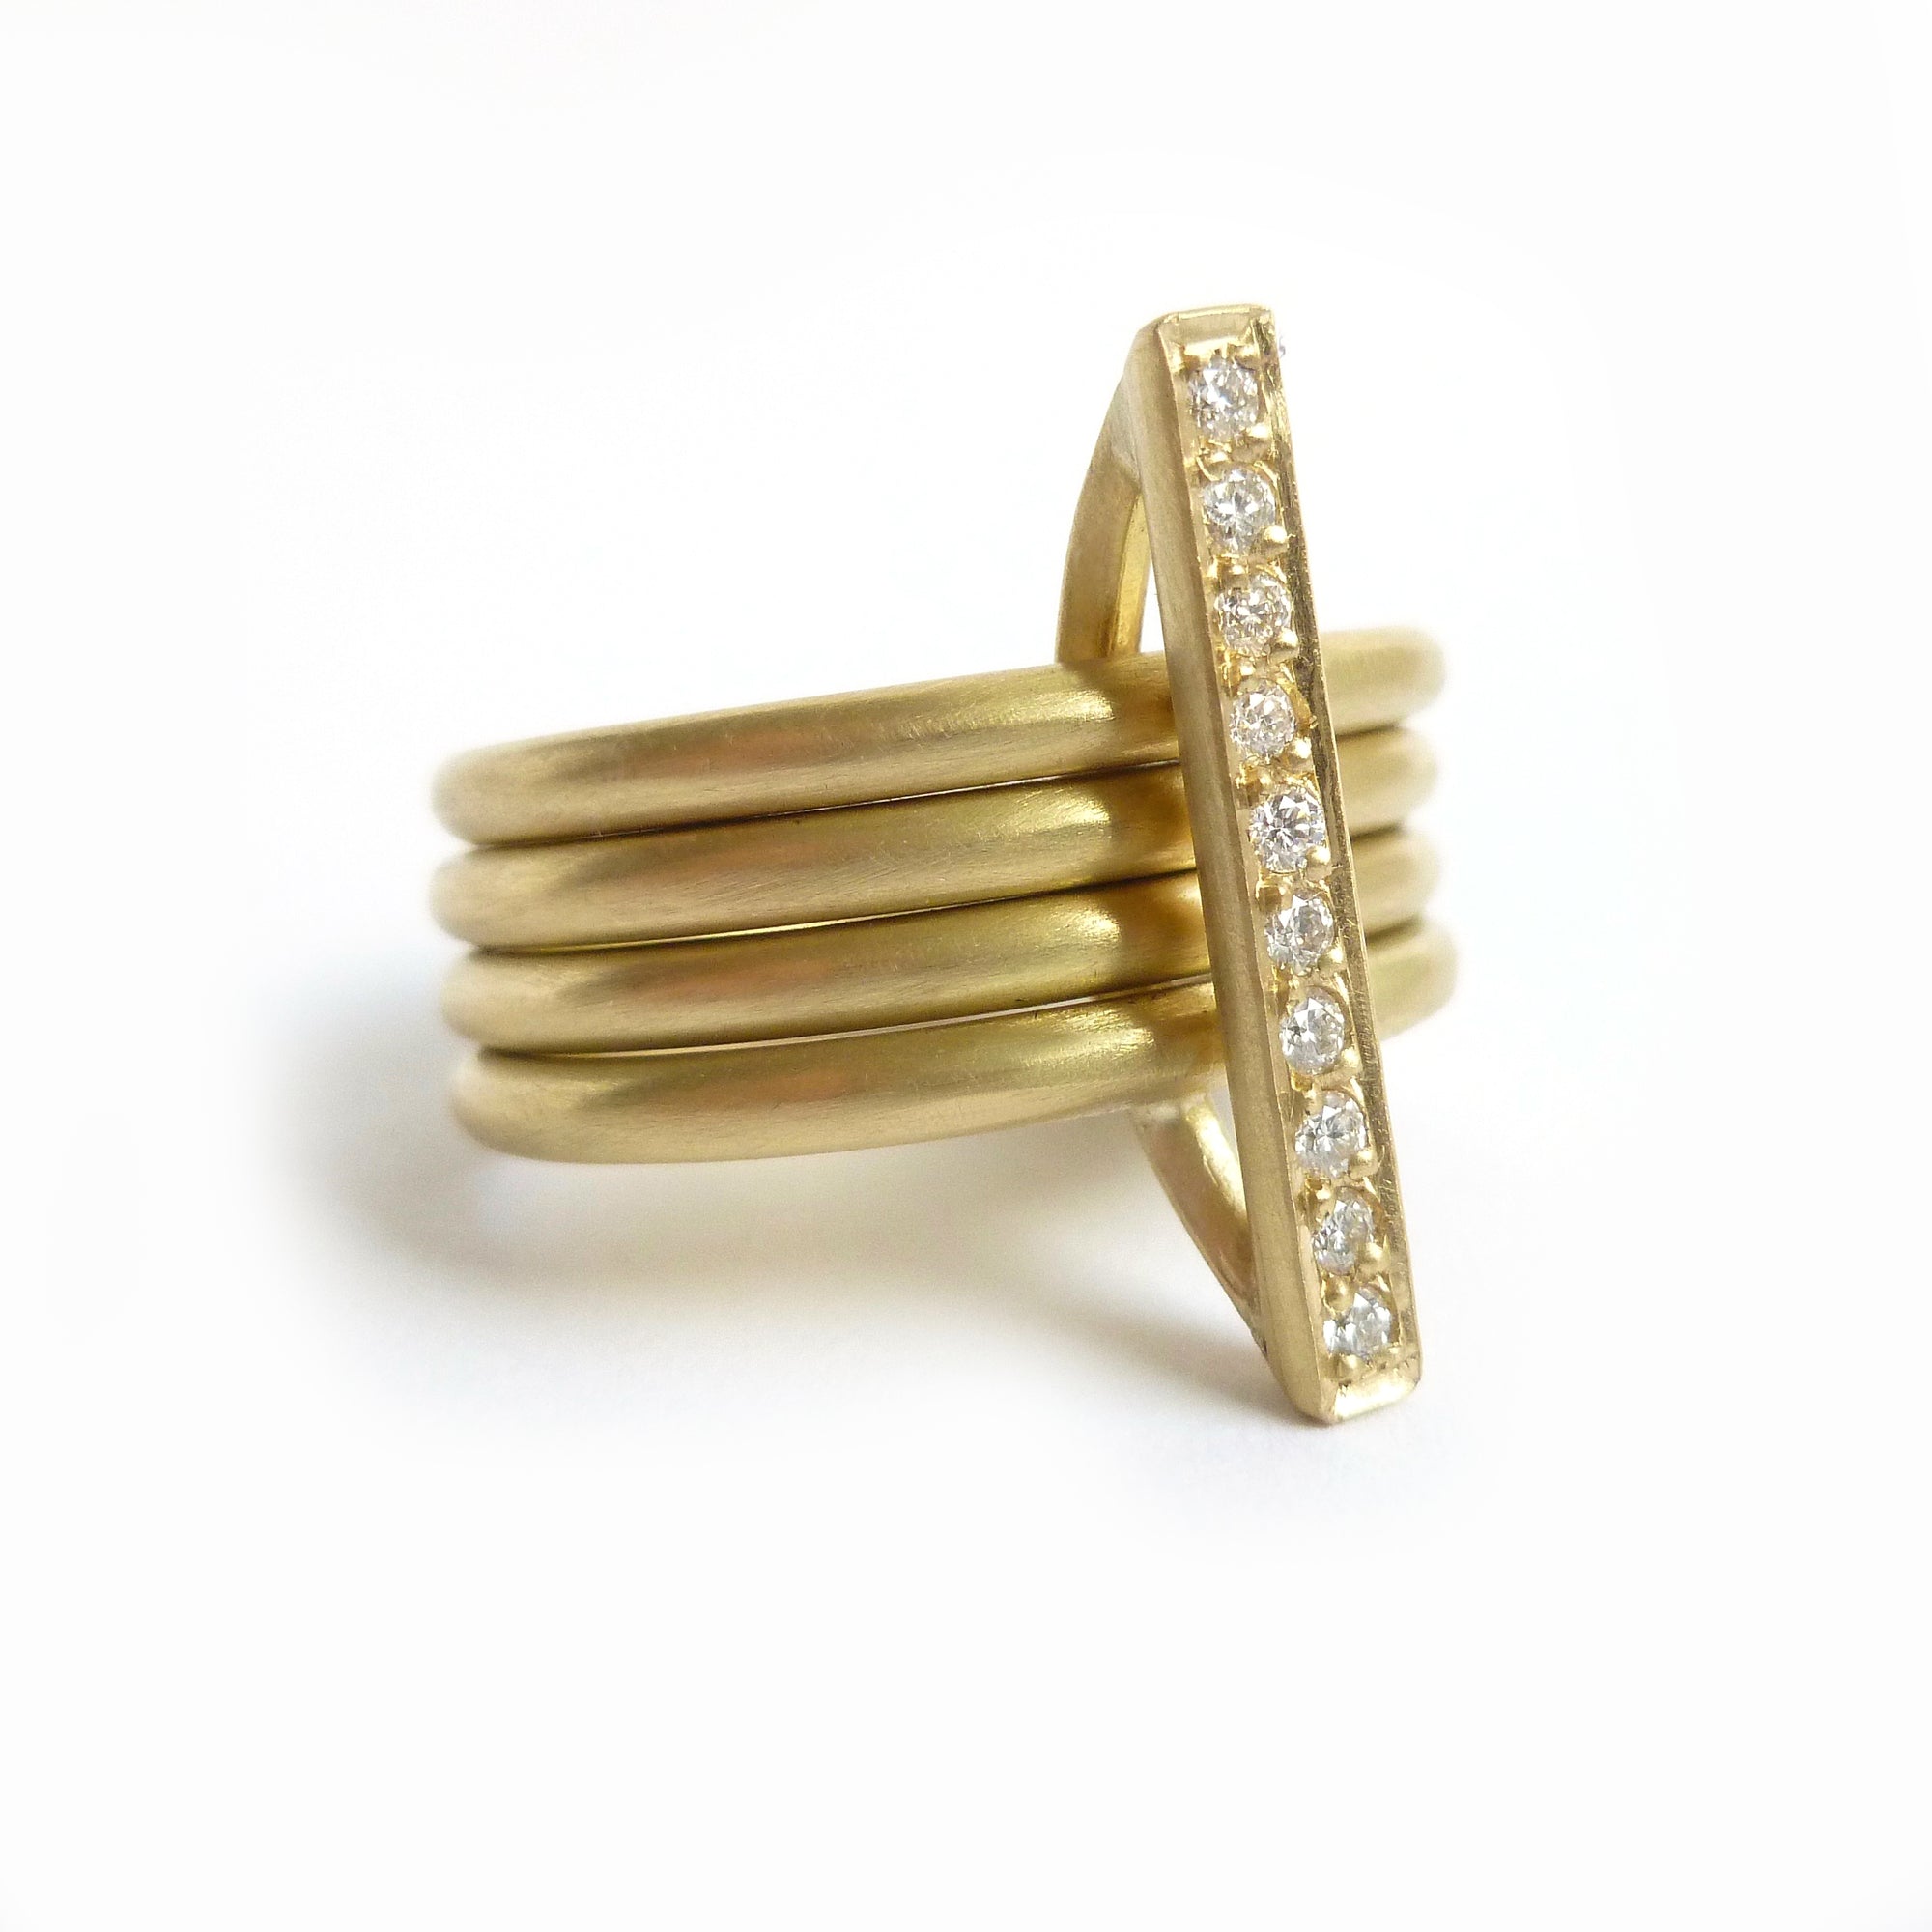 contemporary yellow gold and diamond 4 band stacking rings with a brushed finish. Multi band ring or interlocking ring.